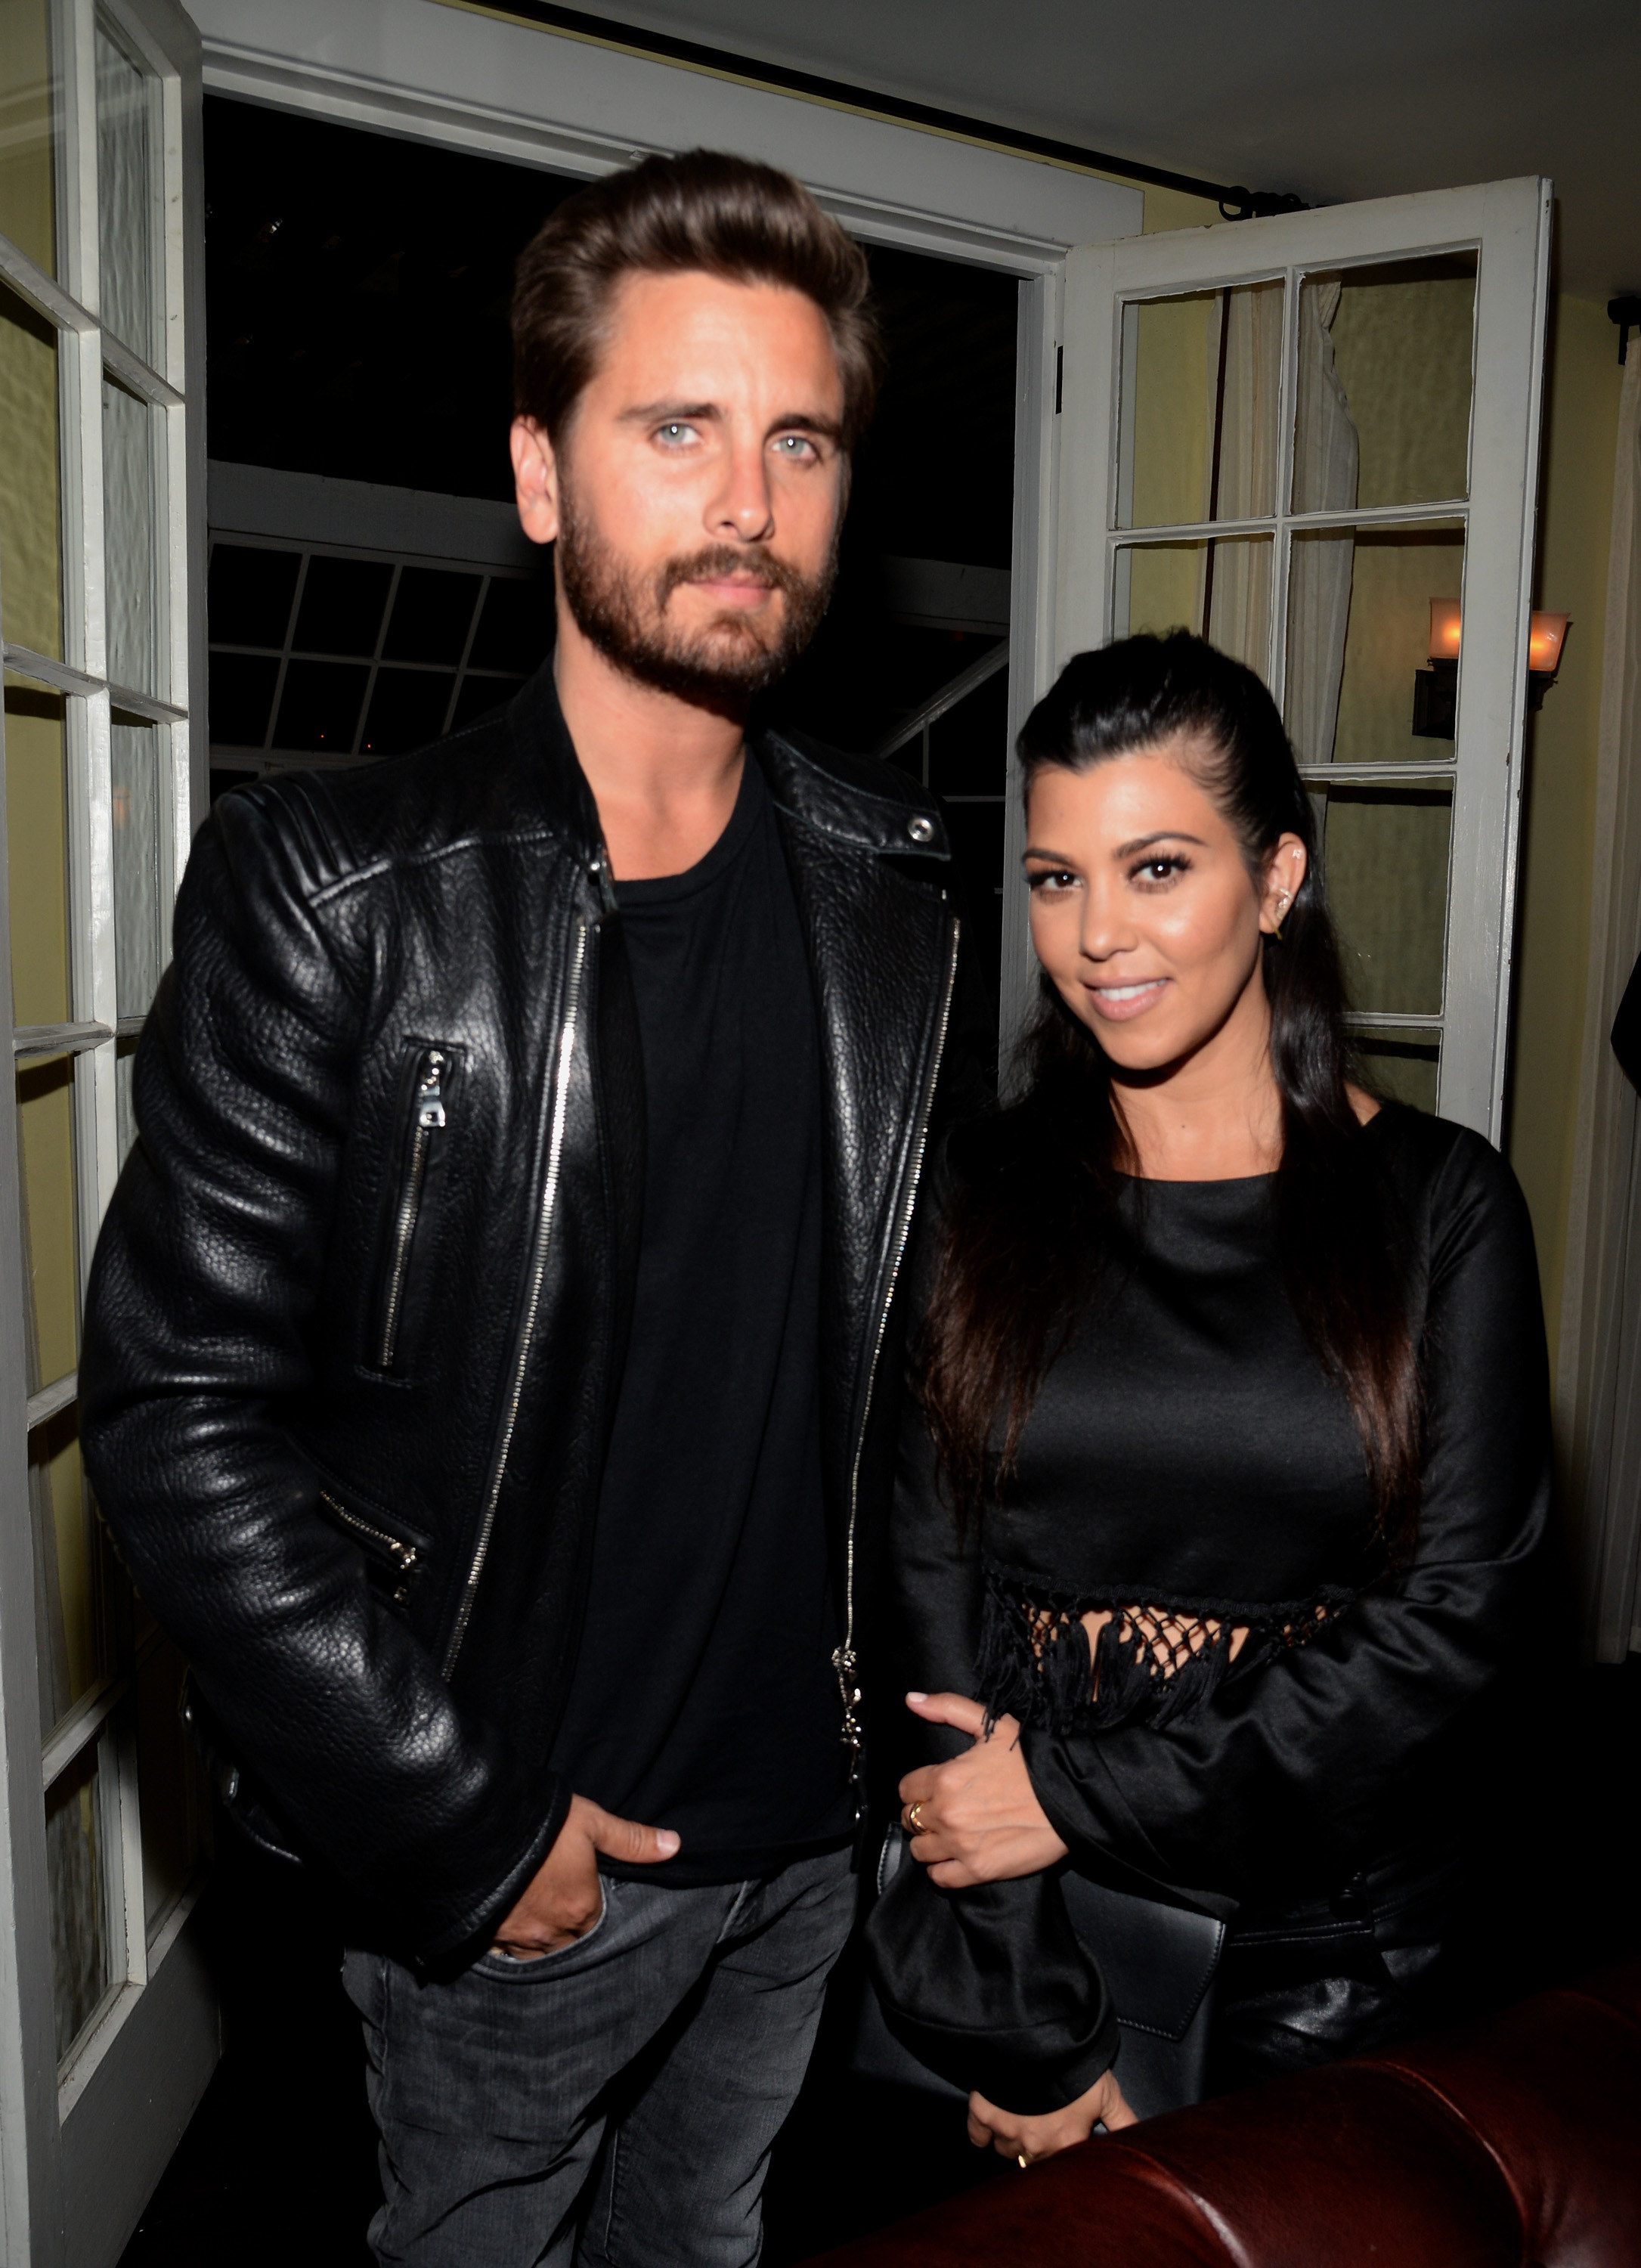 Scott Disick and Kourtney have their photo taken together